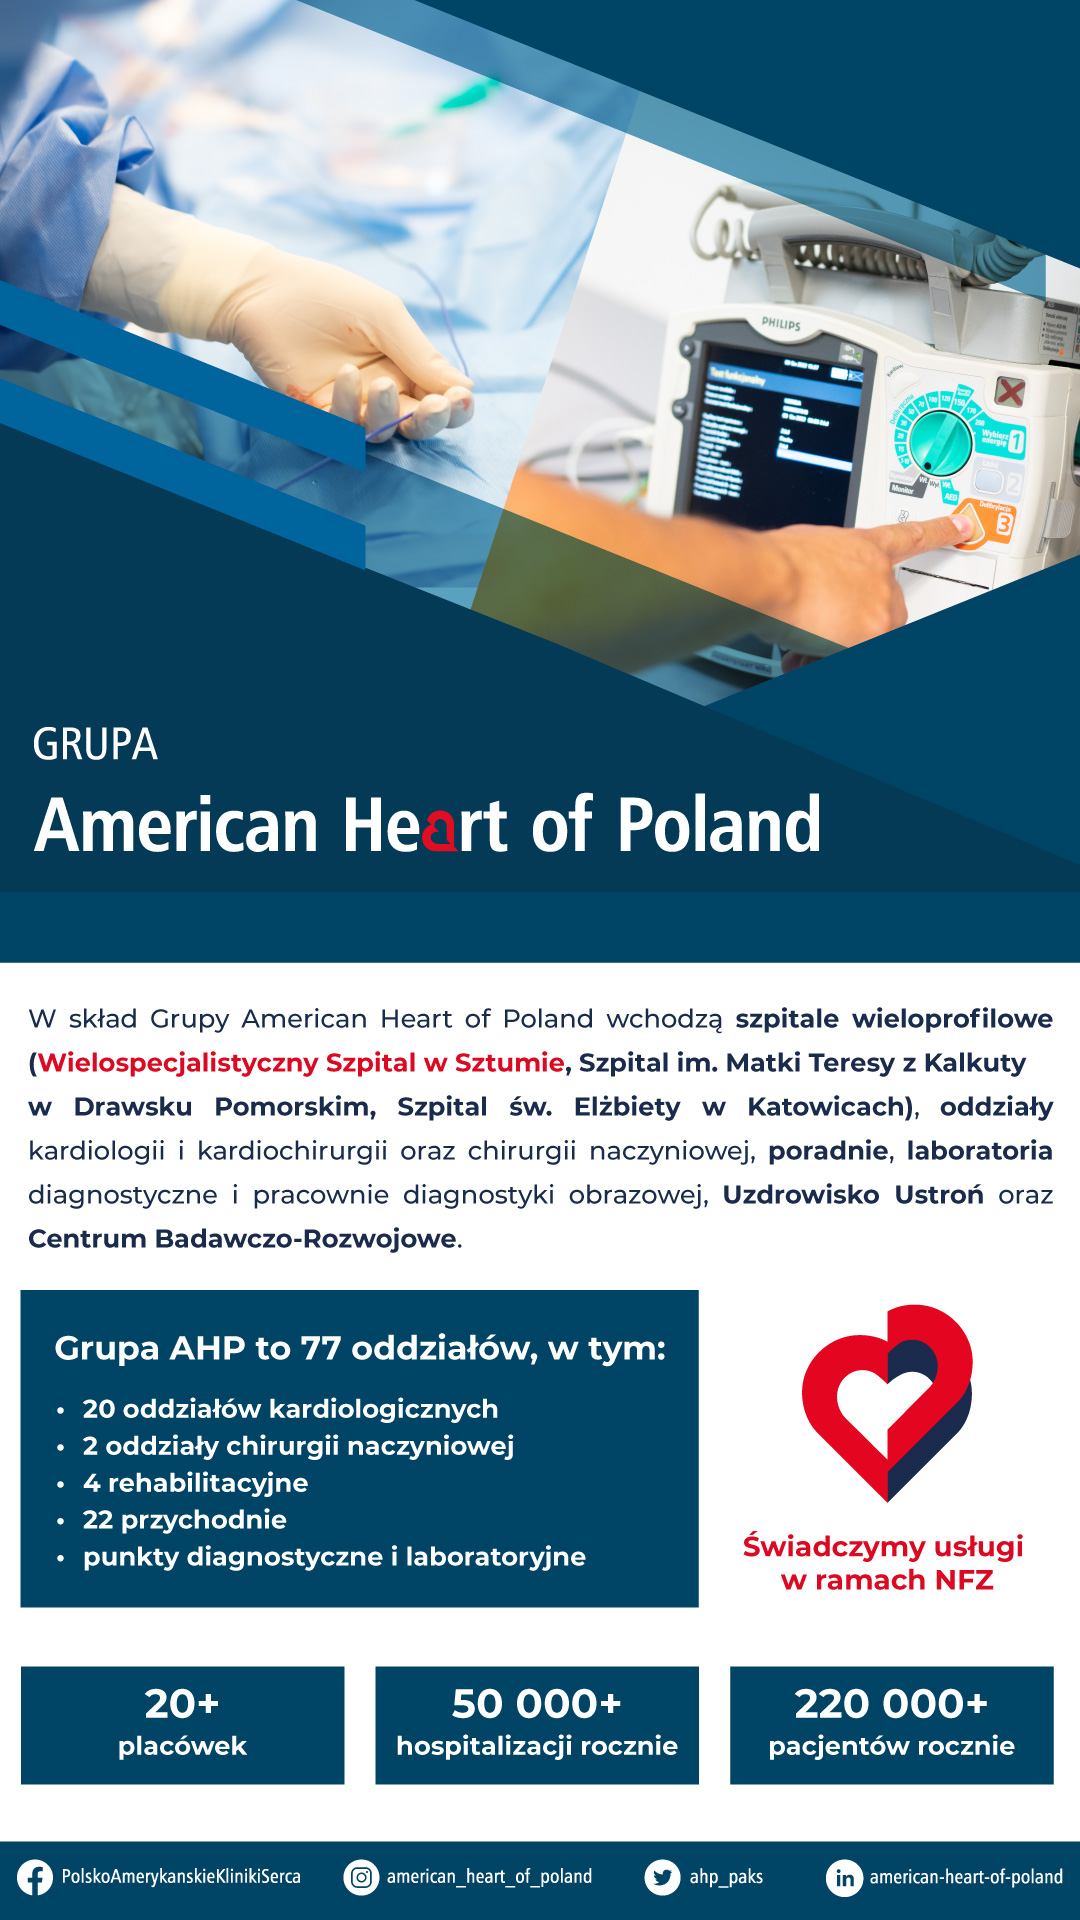 American Heart of Poland S.A.